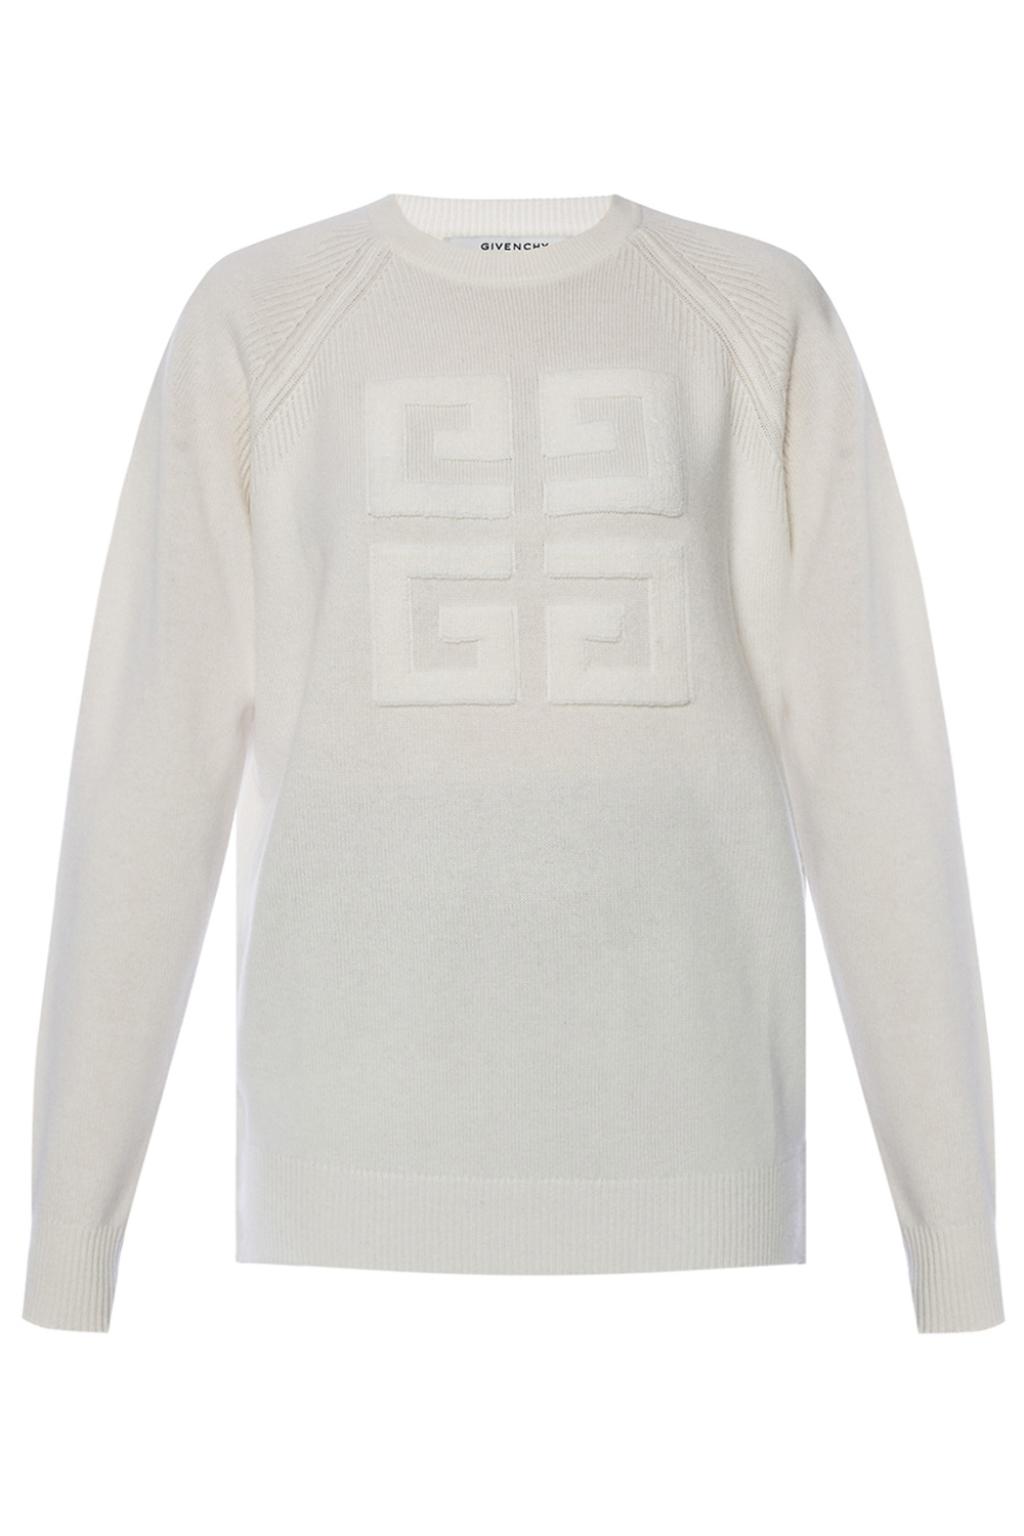 Givenchy Branded cashmere sweater, Women's Clothing